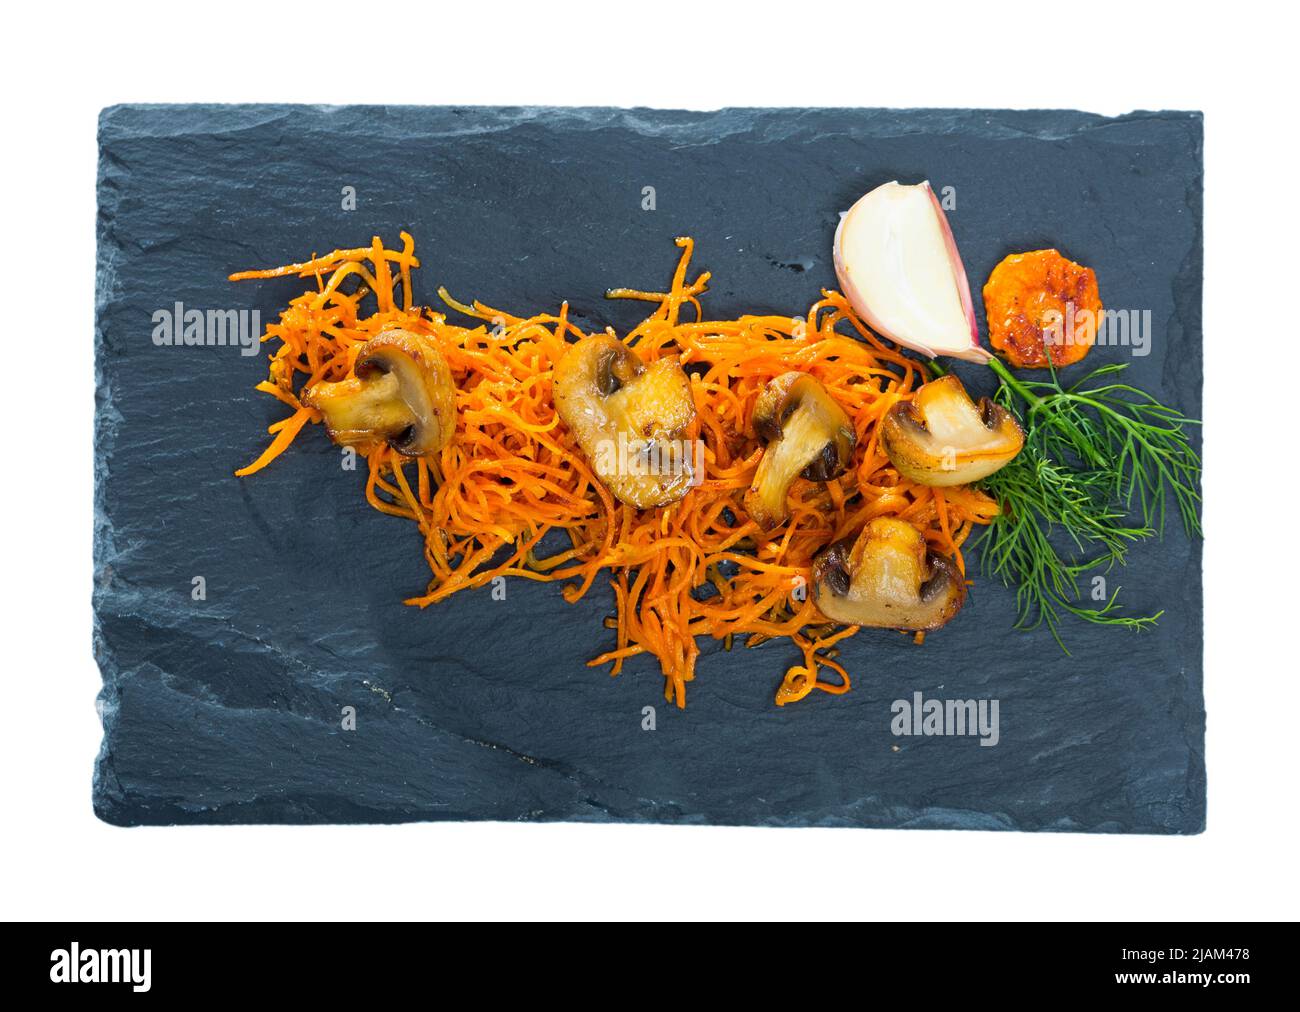 Roasted champignons with julienne carrots Stock Photo